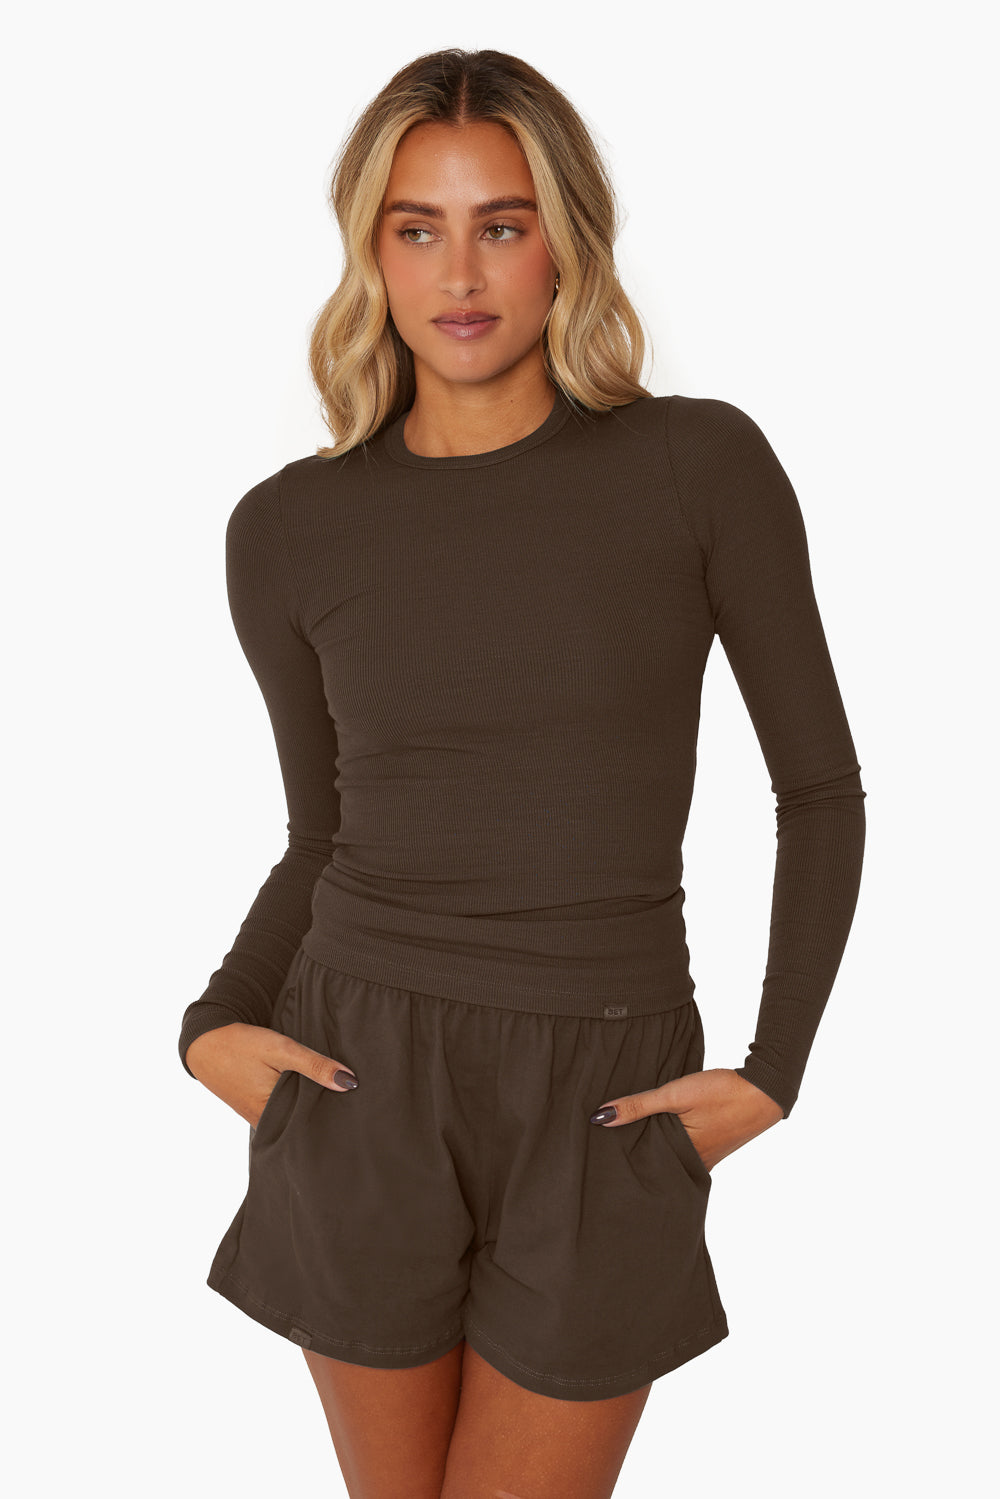 RIBBED MODAL ESSENTIAL LONG SLEEVE - BROWNSTONE Featured Image